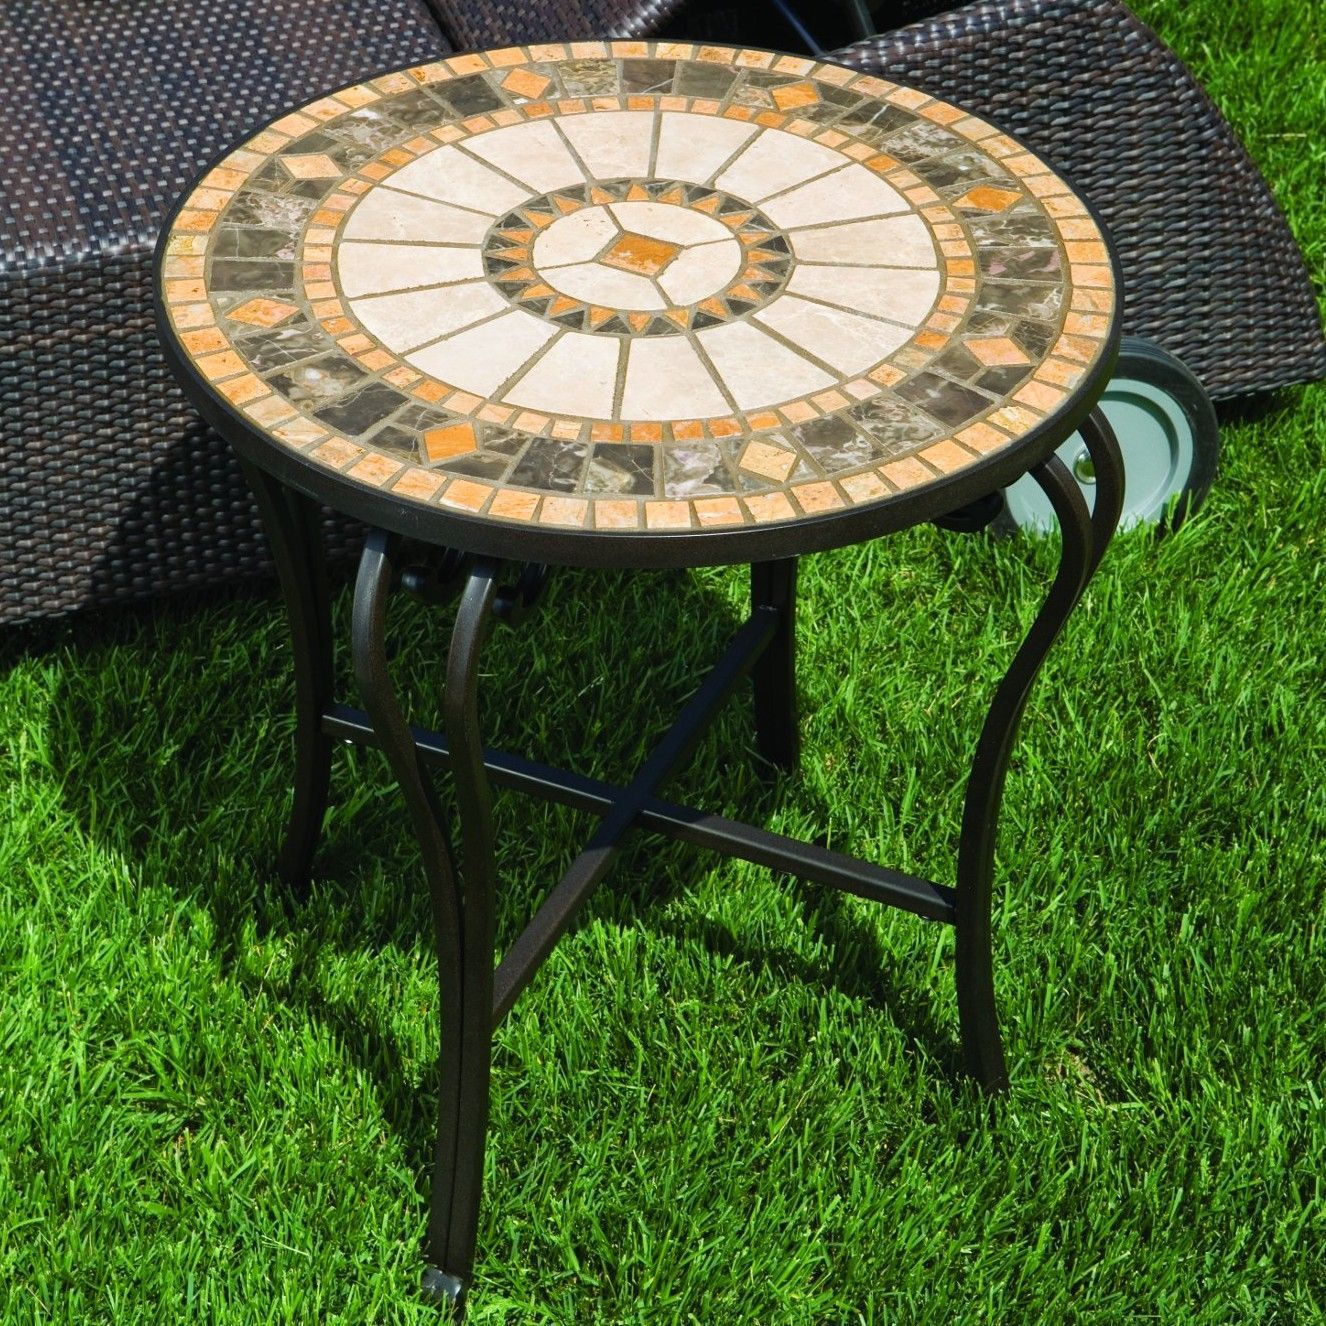 Alfresco Home Compass Mosaic Side Table | Patio Side Table, Mosaic Tile Throughout Mosaic Tile Top Round Side Tables (View 3 of 15)